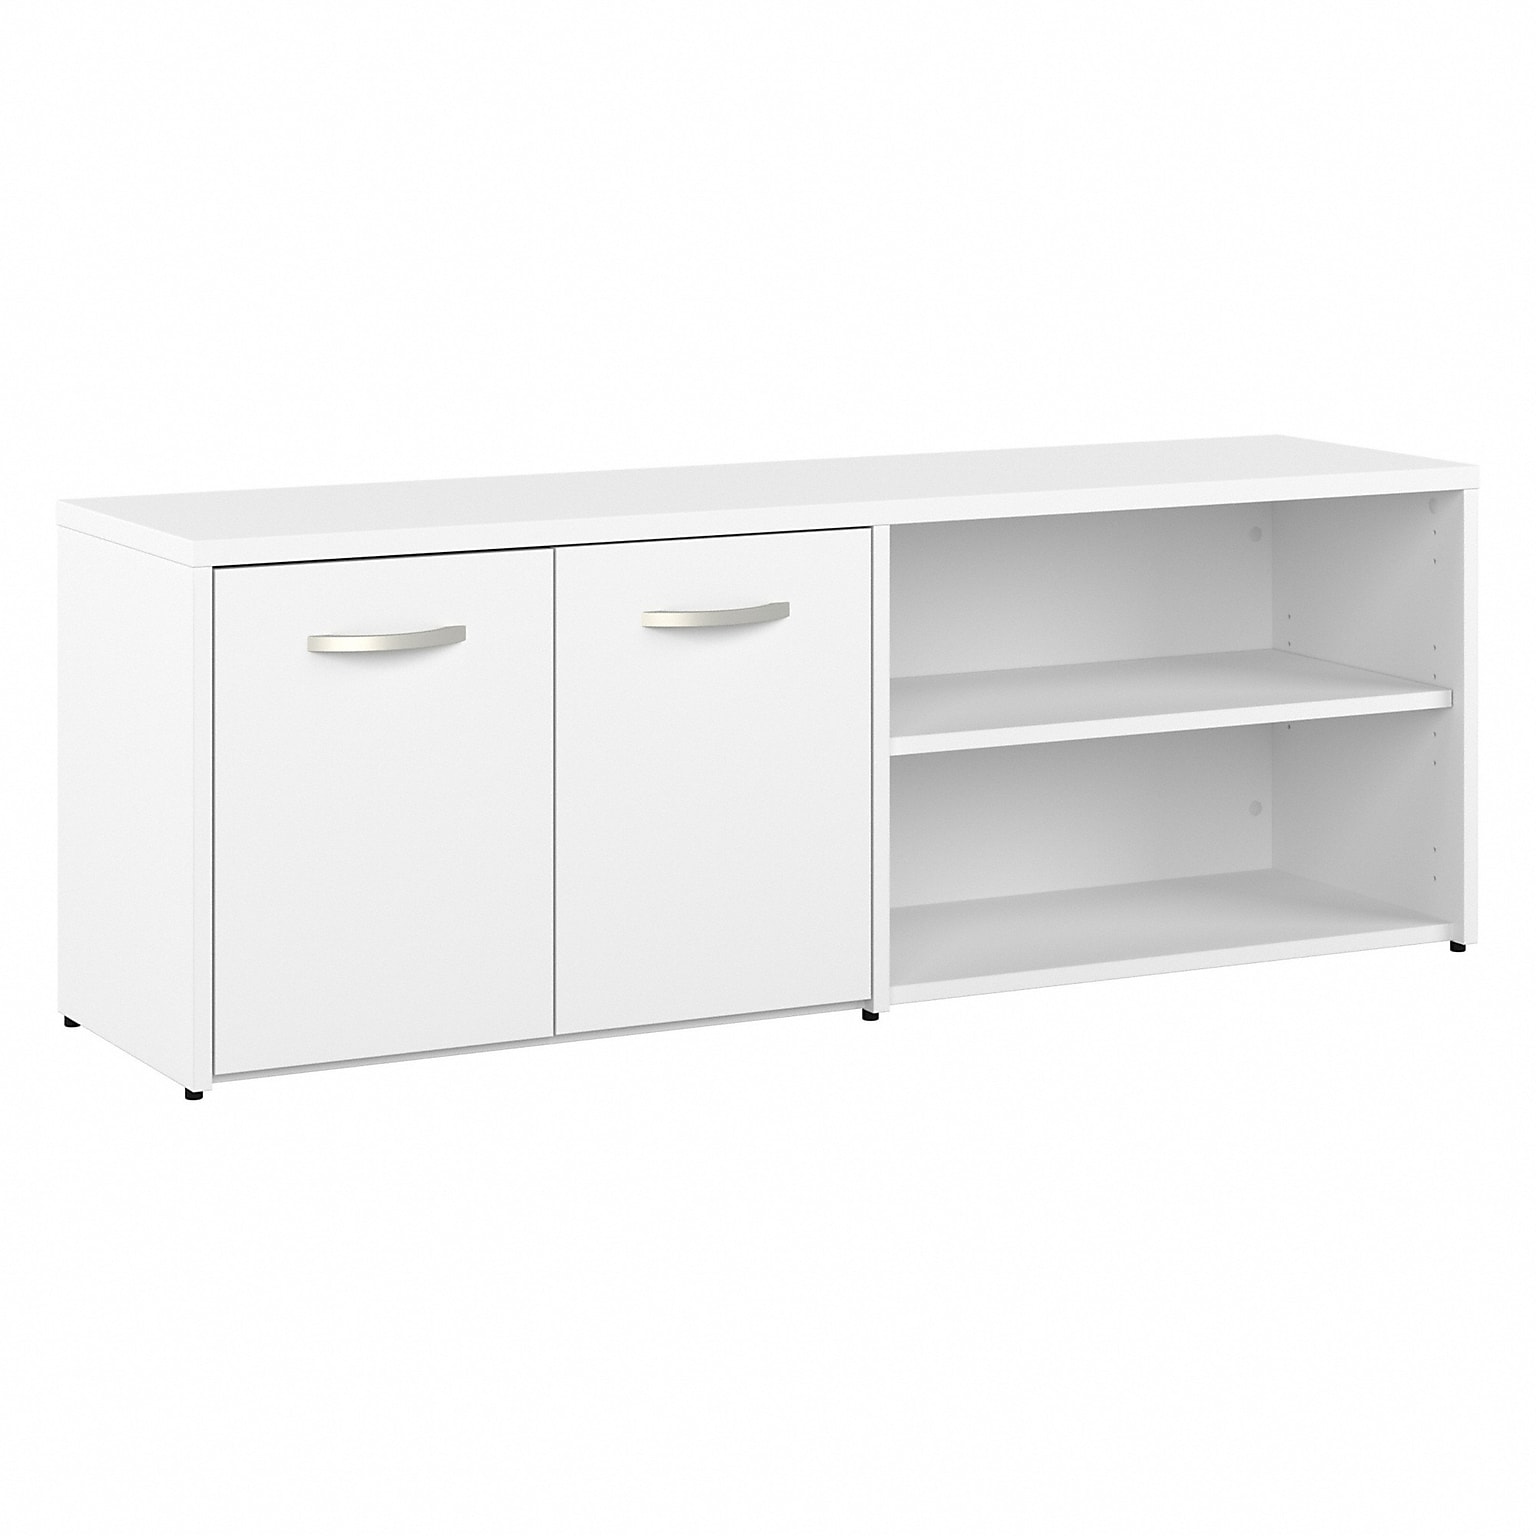 Bush Business Furniture Studio A 21 Low Storage Cabinet with 4 Shelves and Doors, White (SDS160WH-Z)